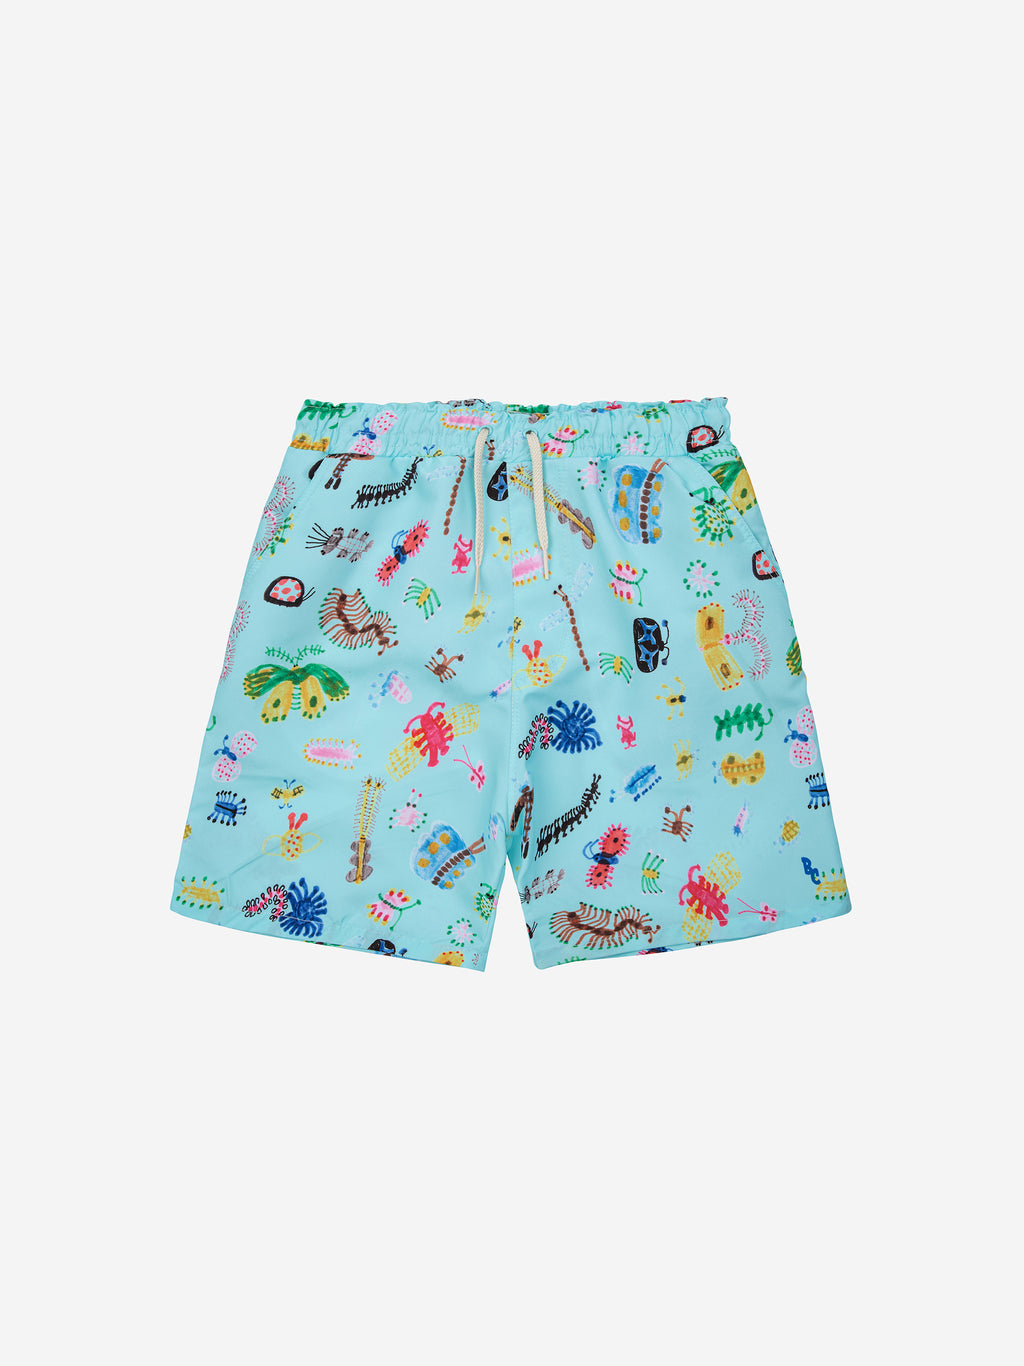 Bobo Choses Baby Funny Insects All Over Swim Shorts - Aqua Blue